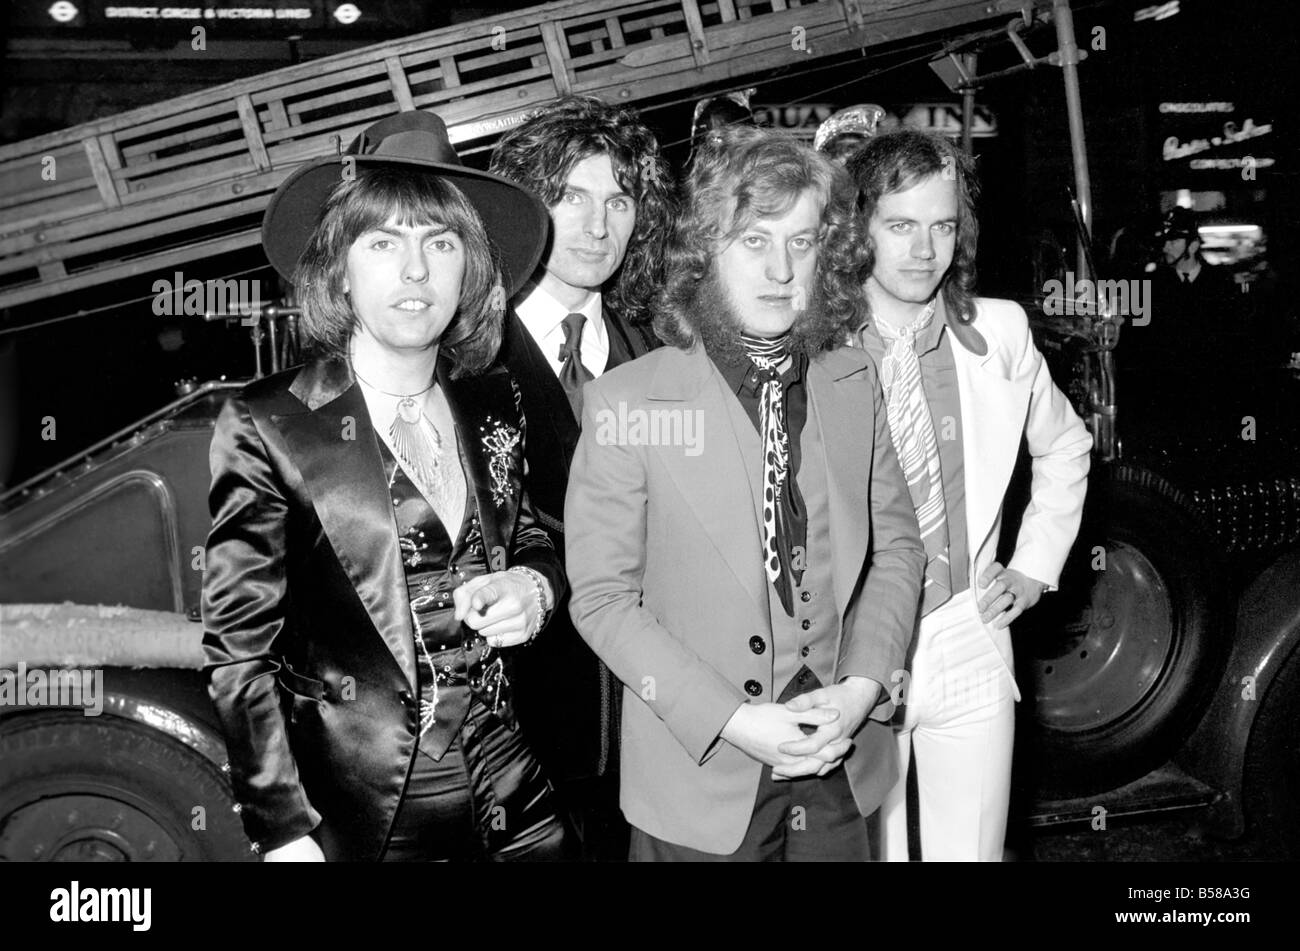 The Slade pop group on fire engine. L to R Dave Hill, Don Powell, Jimmy Lea, Noddy Holder. February 1975 75-00872-003 Stock Photo